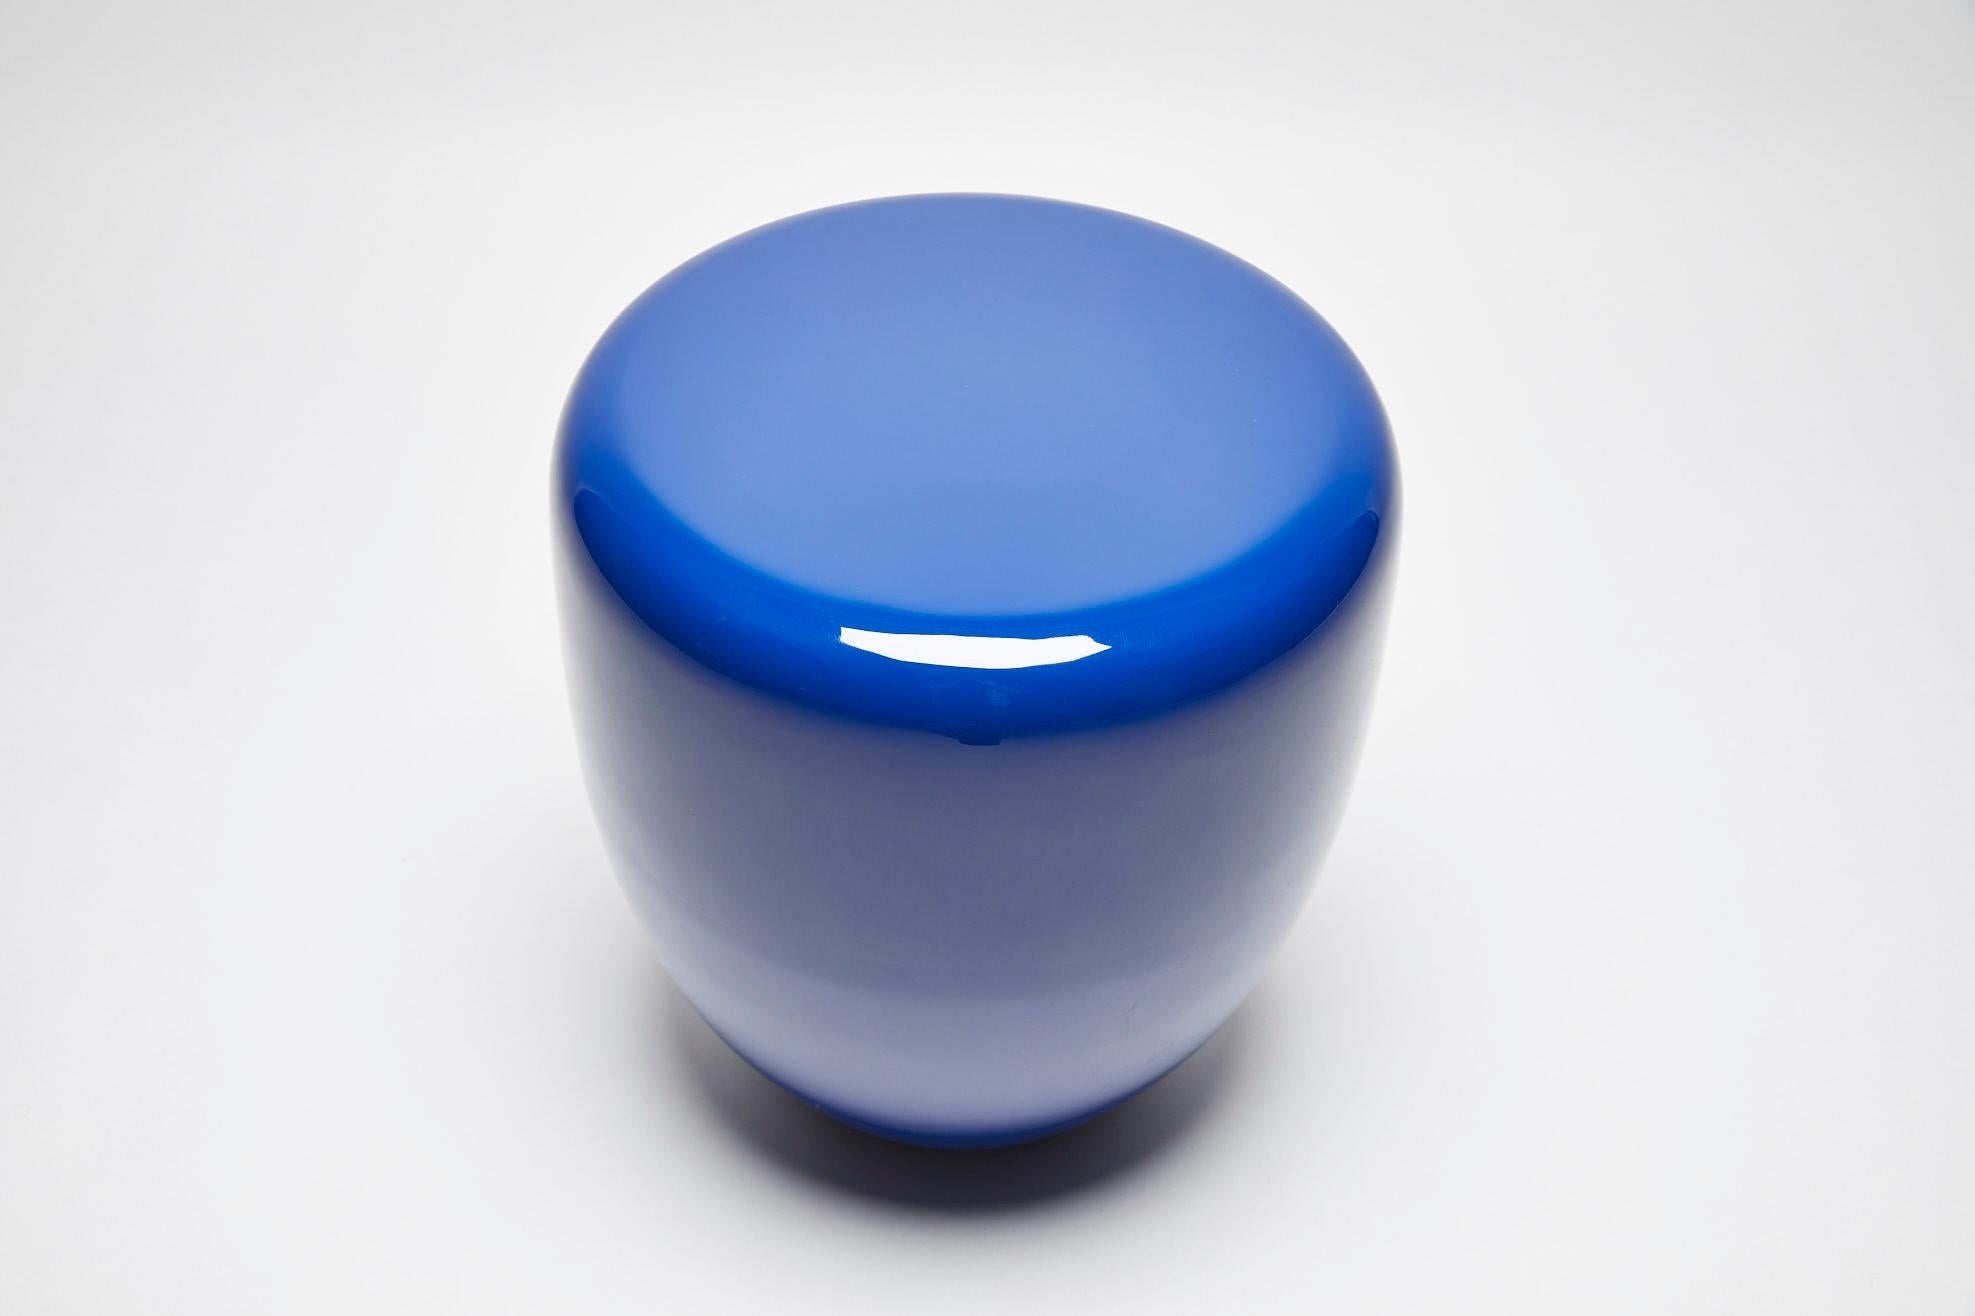 Minimalist Side Table, Persian Blue DOT by Reda Amalou Design, 2017 -Glossy or mate lacquer For Sale